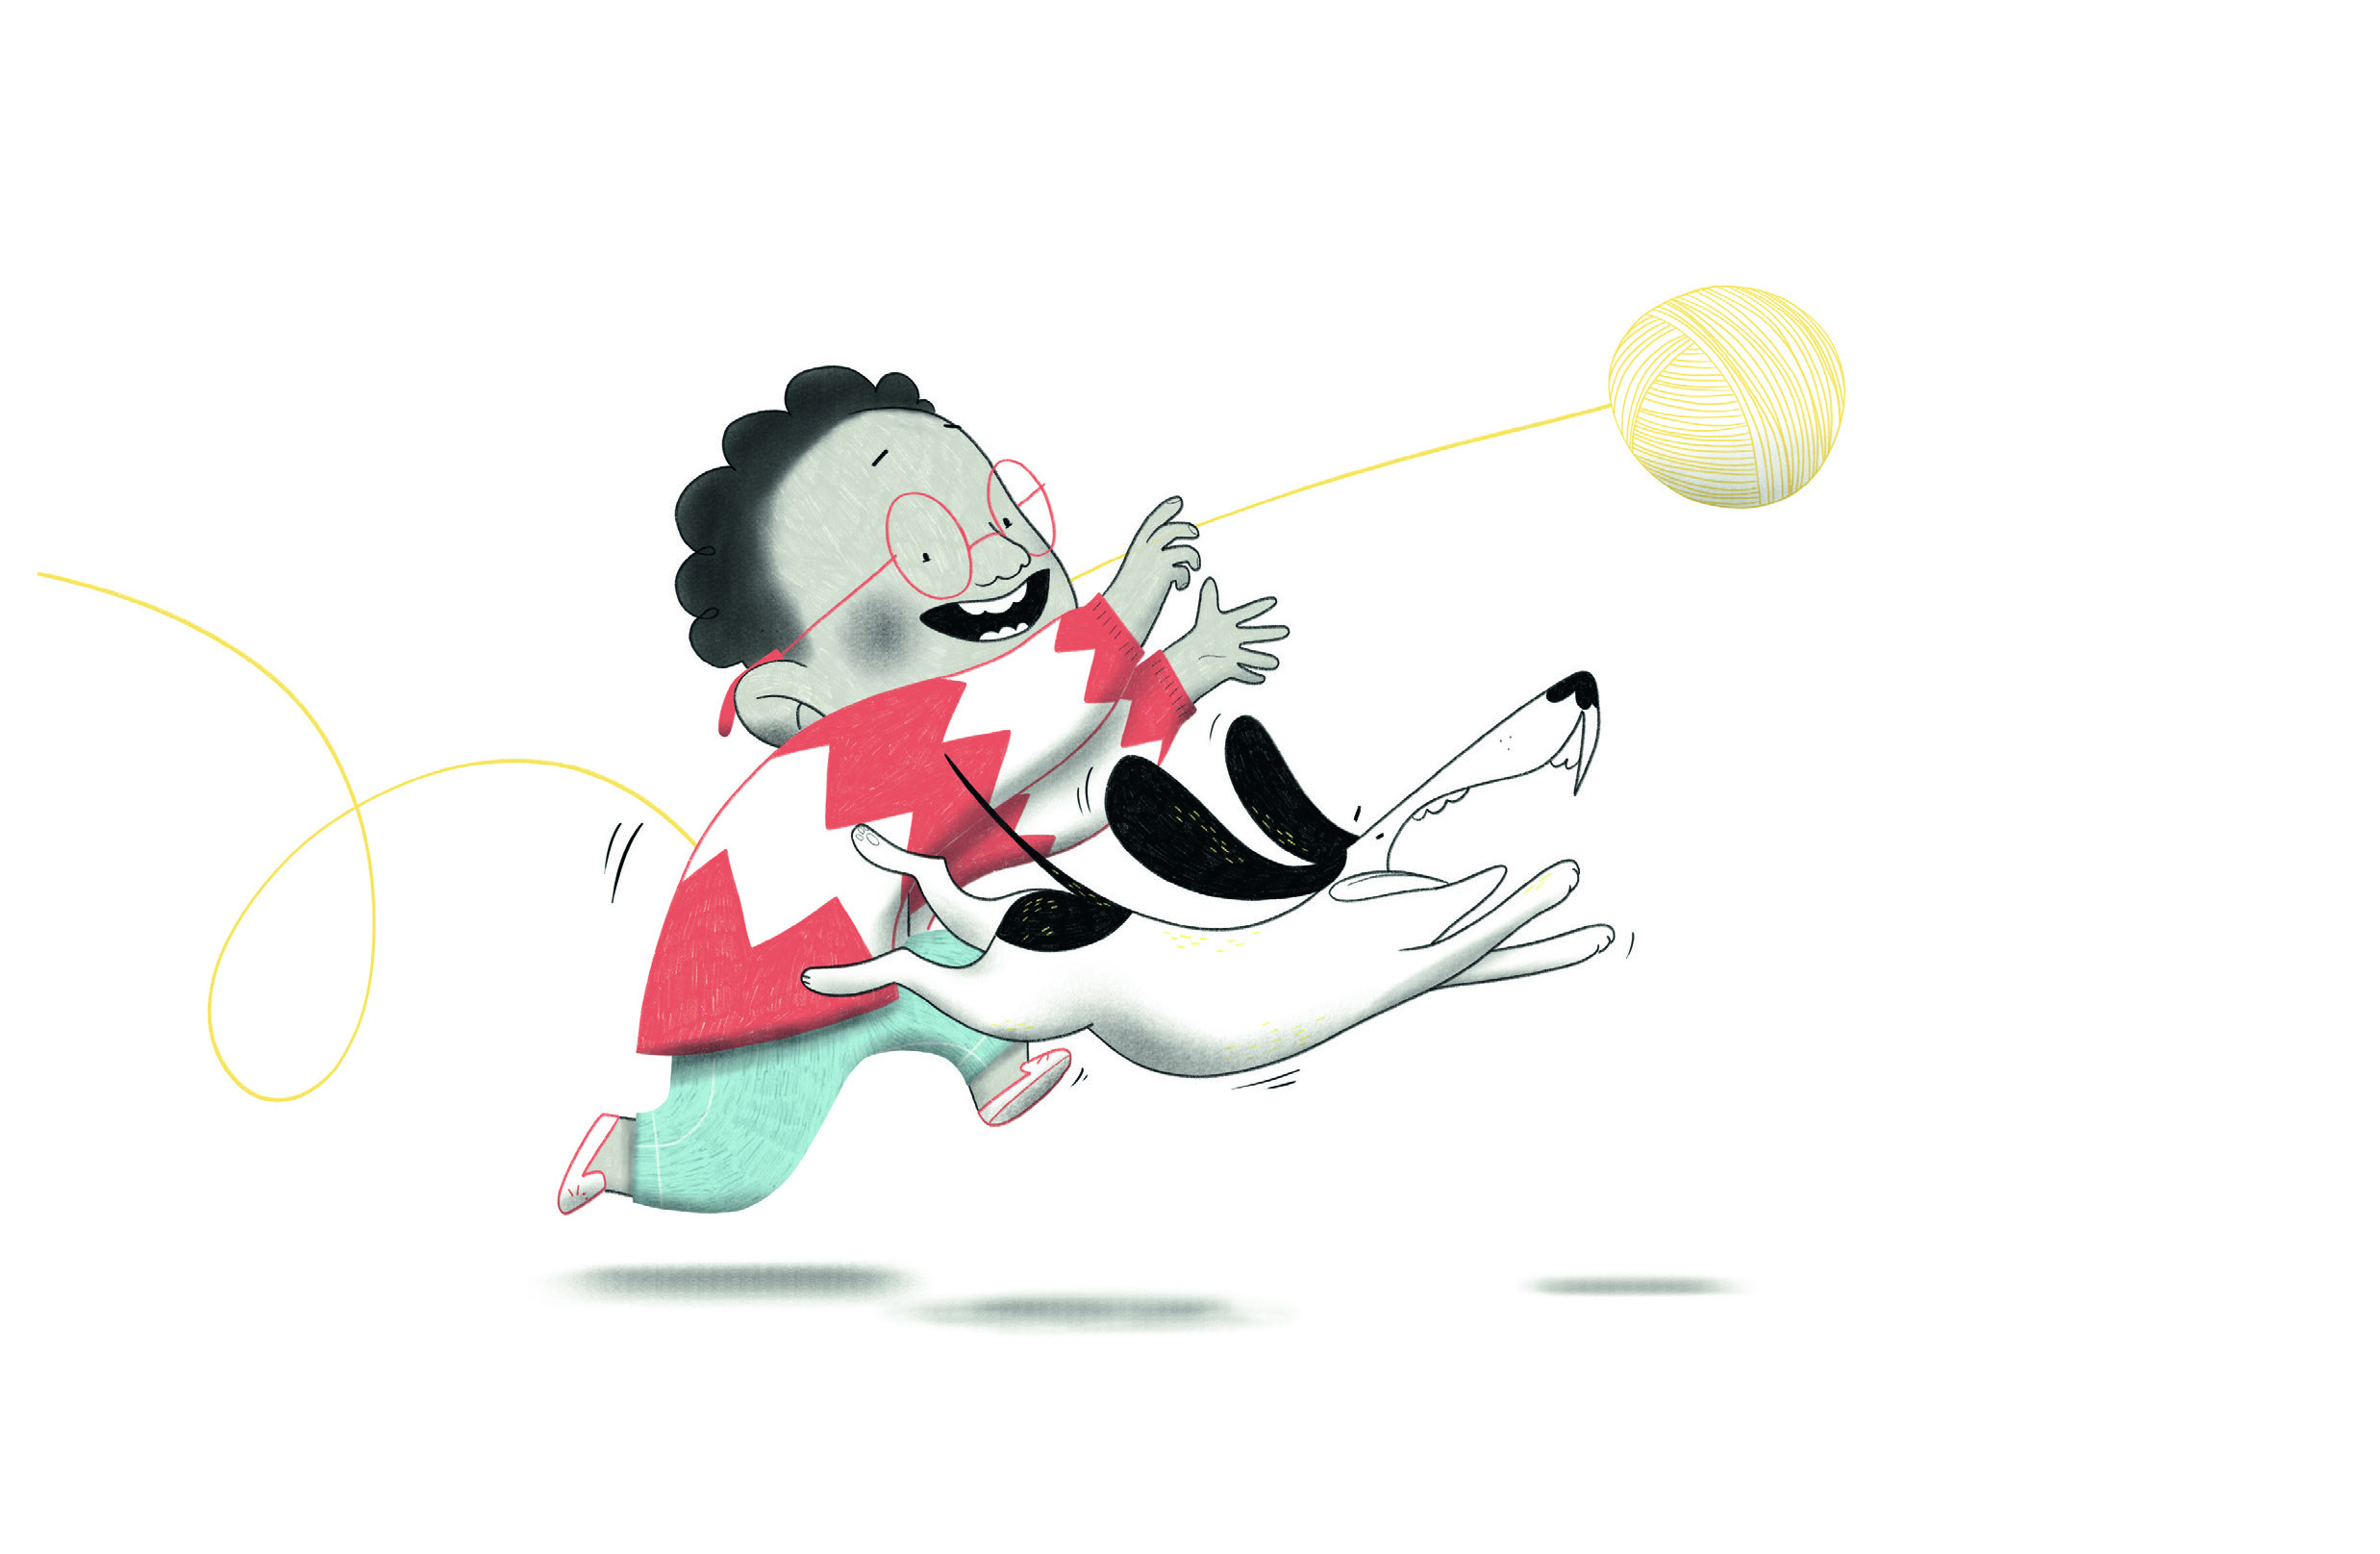 Image from While We Wait showing a young boy and a dog chasing a ball of yarn